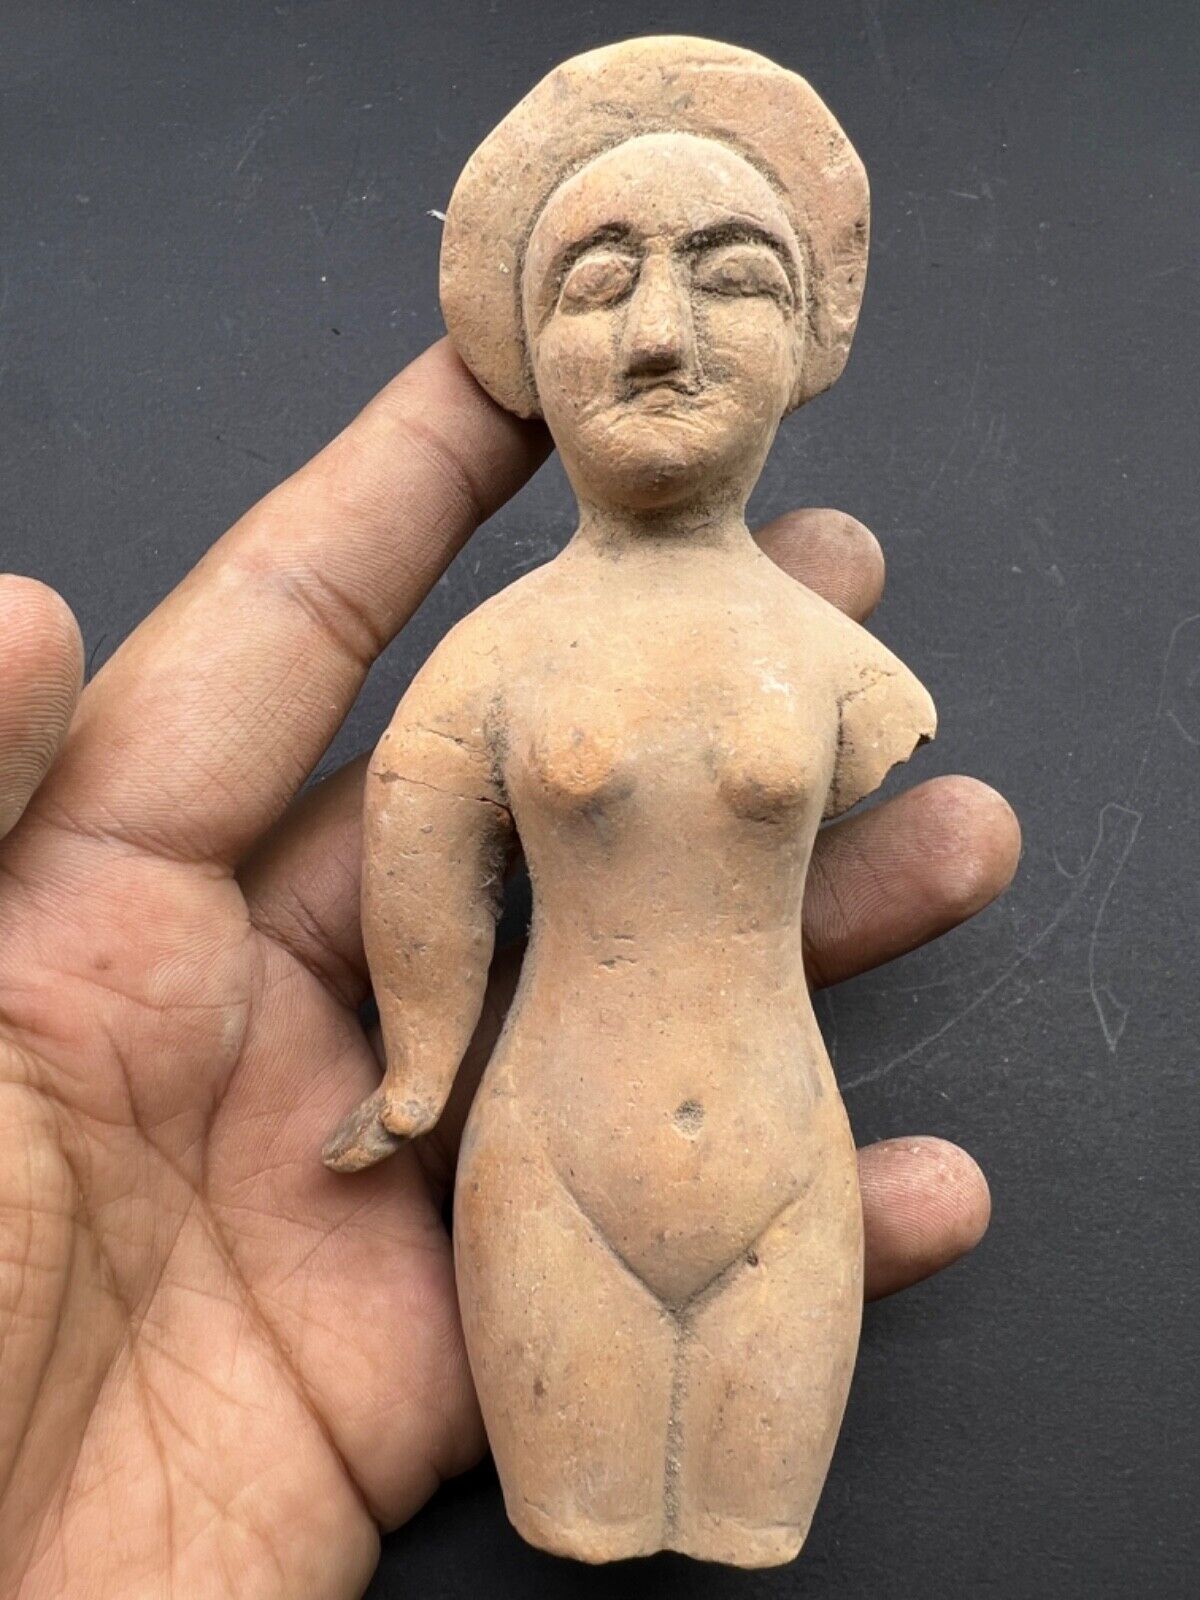 Remarkable Old Ancient Afghanistan  Antiquités Roman Half Body Clay Statue Figur